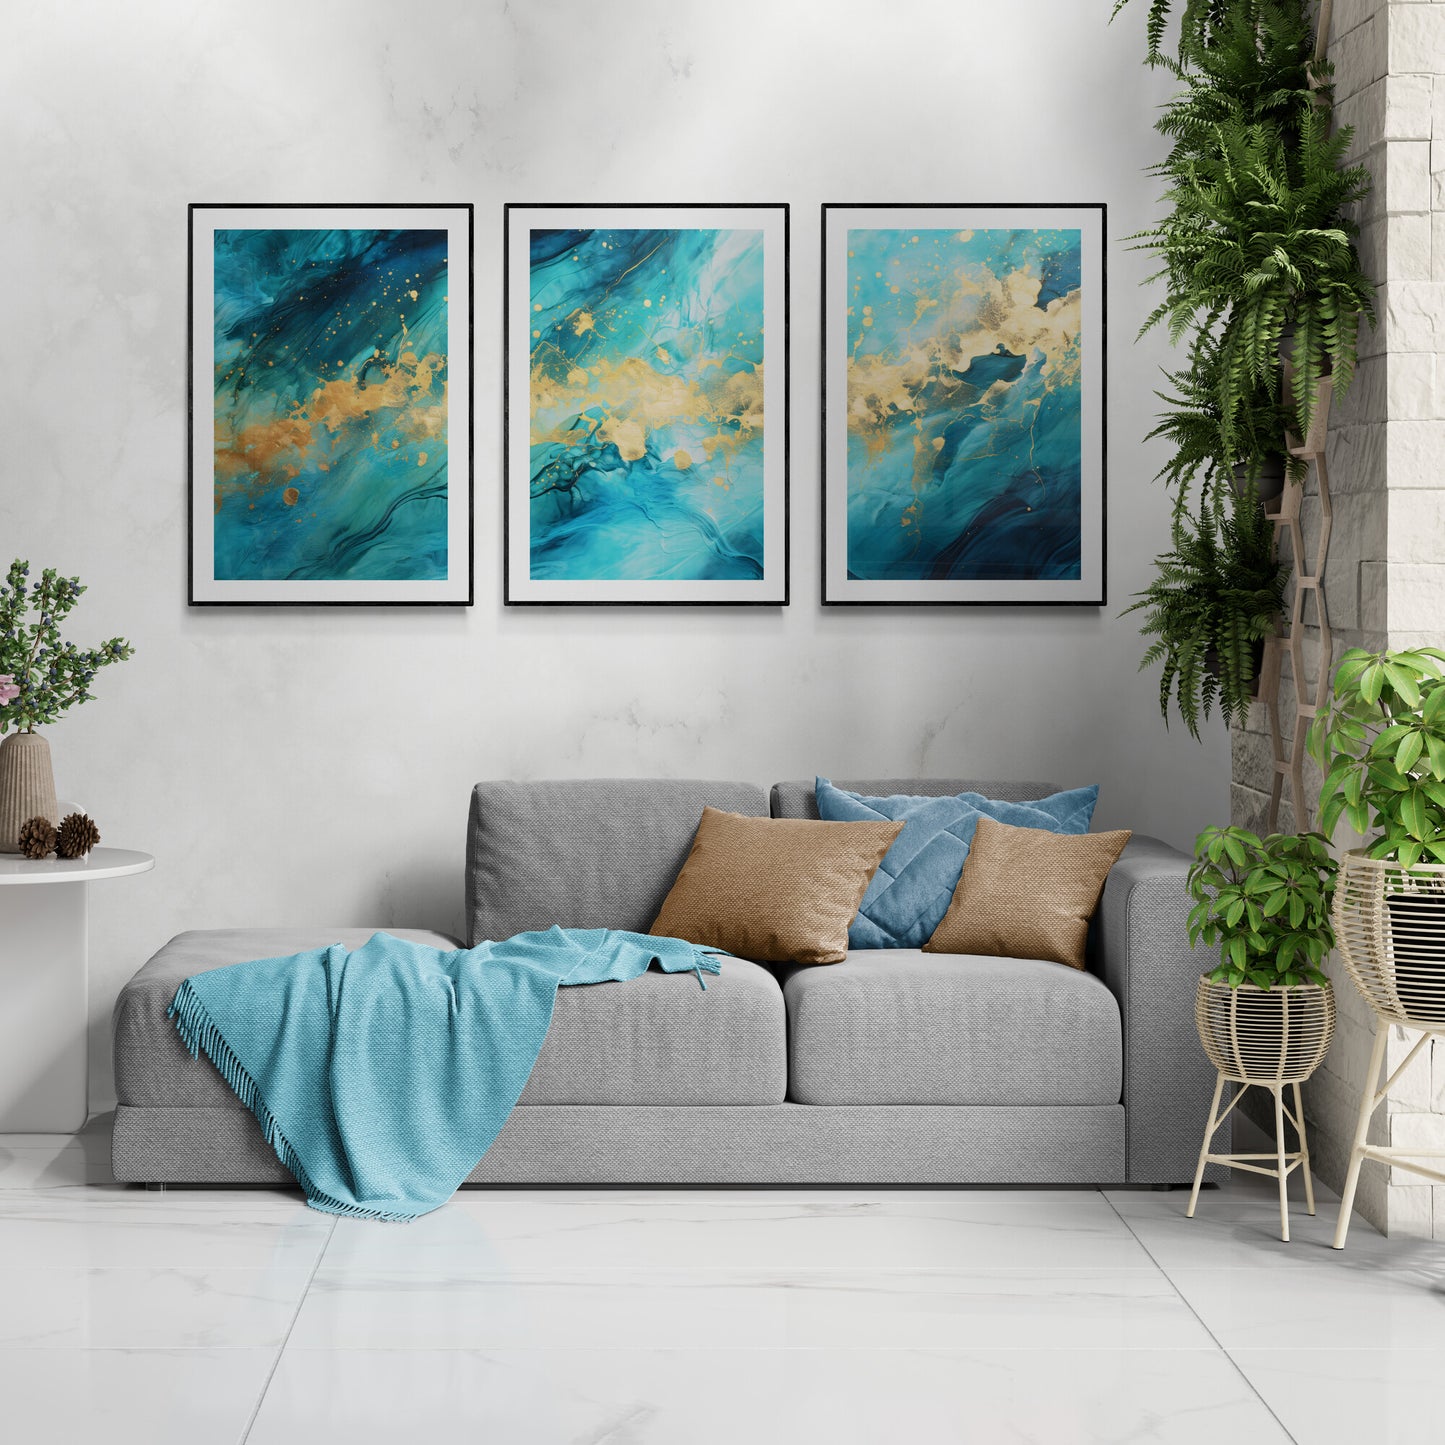 Blue and Gold Wall Art Set of 3 Prints Abstract Petrol Design with Gold Bedroom Art Modern Gold Wall Art Triptych Prints Paper Poster Print